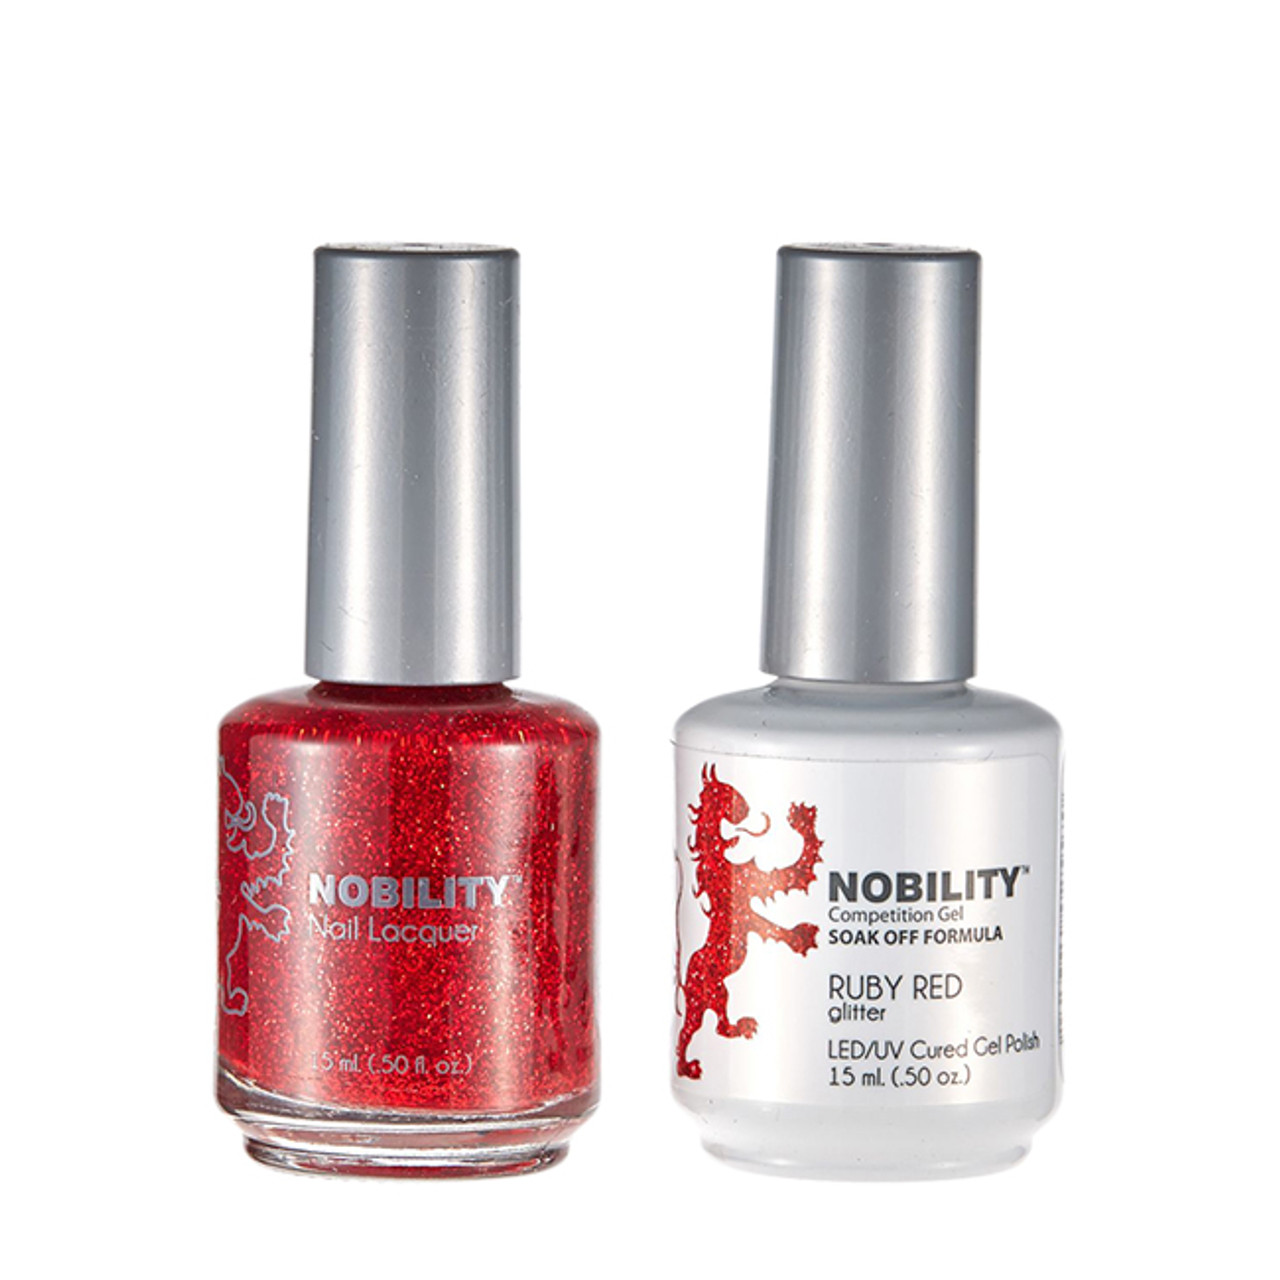 LeChat Nobility Gel Polish & Nail Lacquer Duo Set Ruby Red - .5 oz / 15 ml